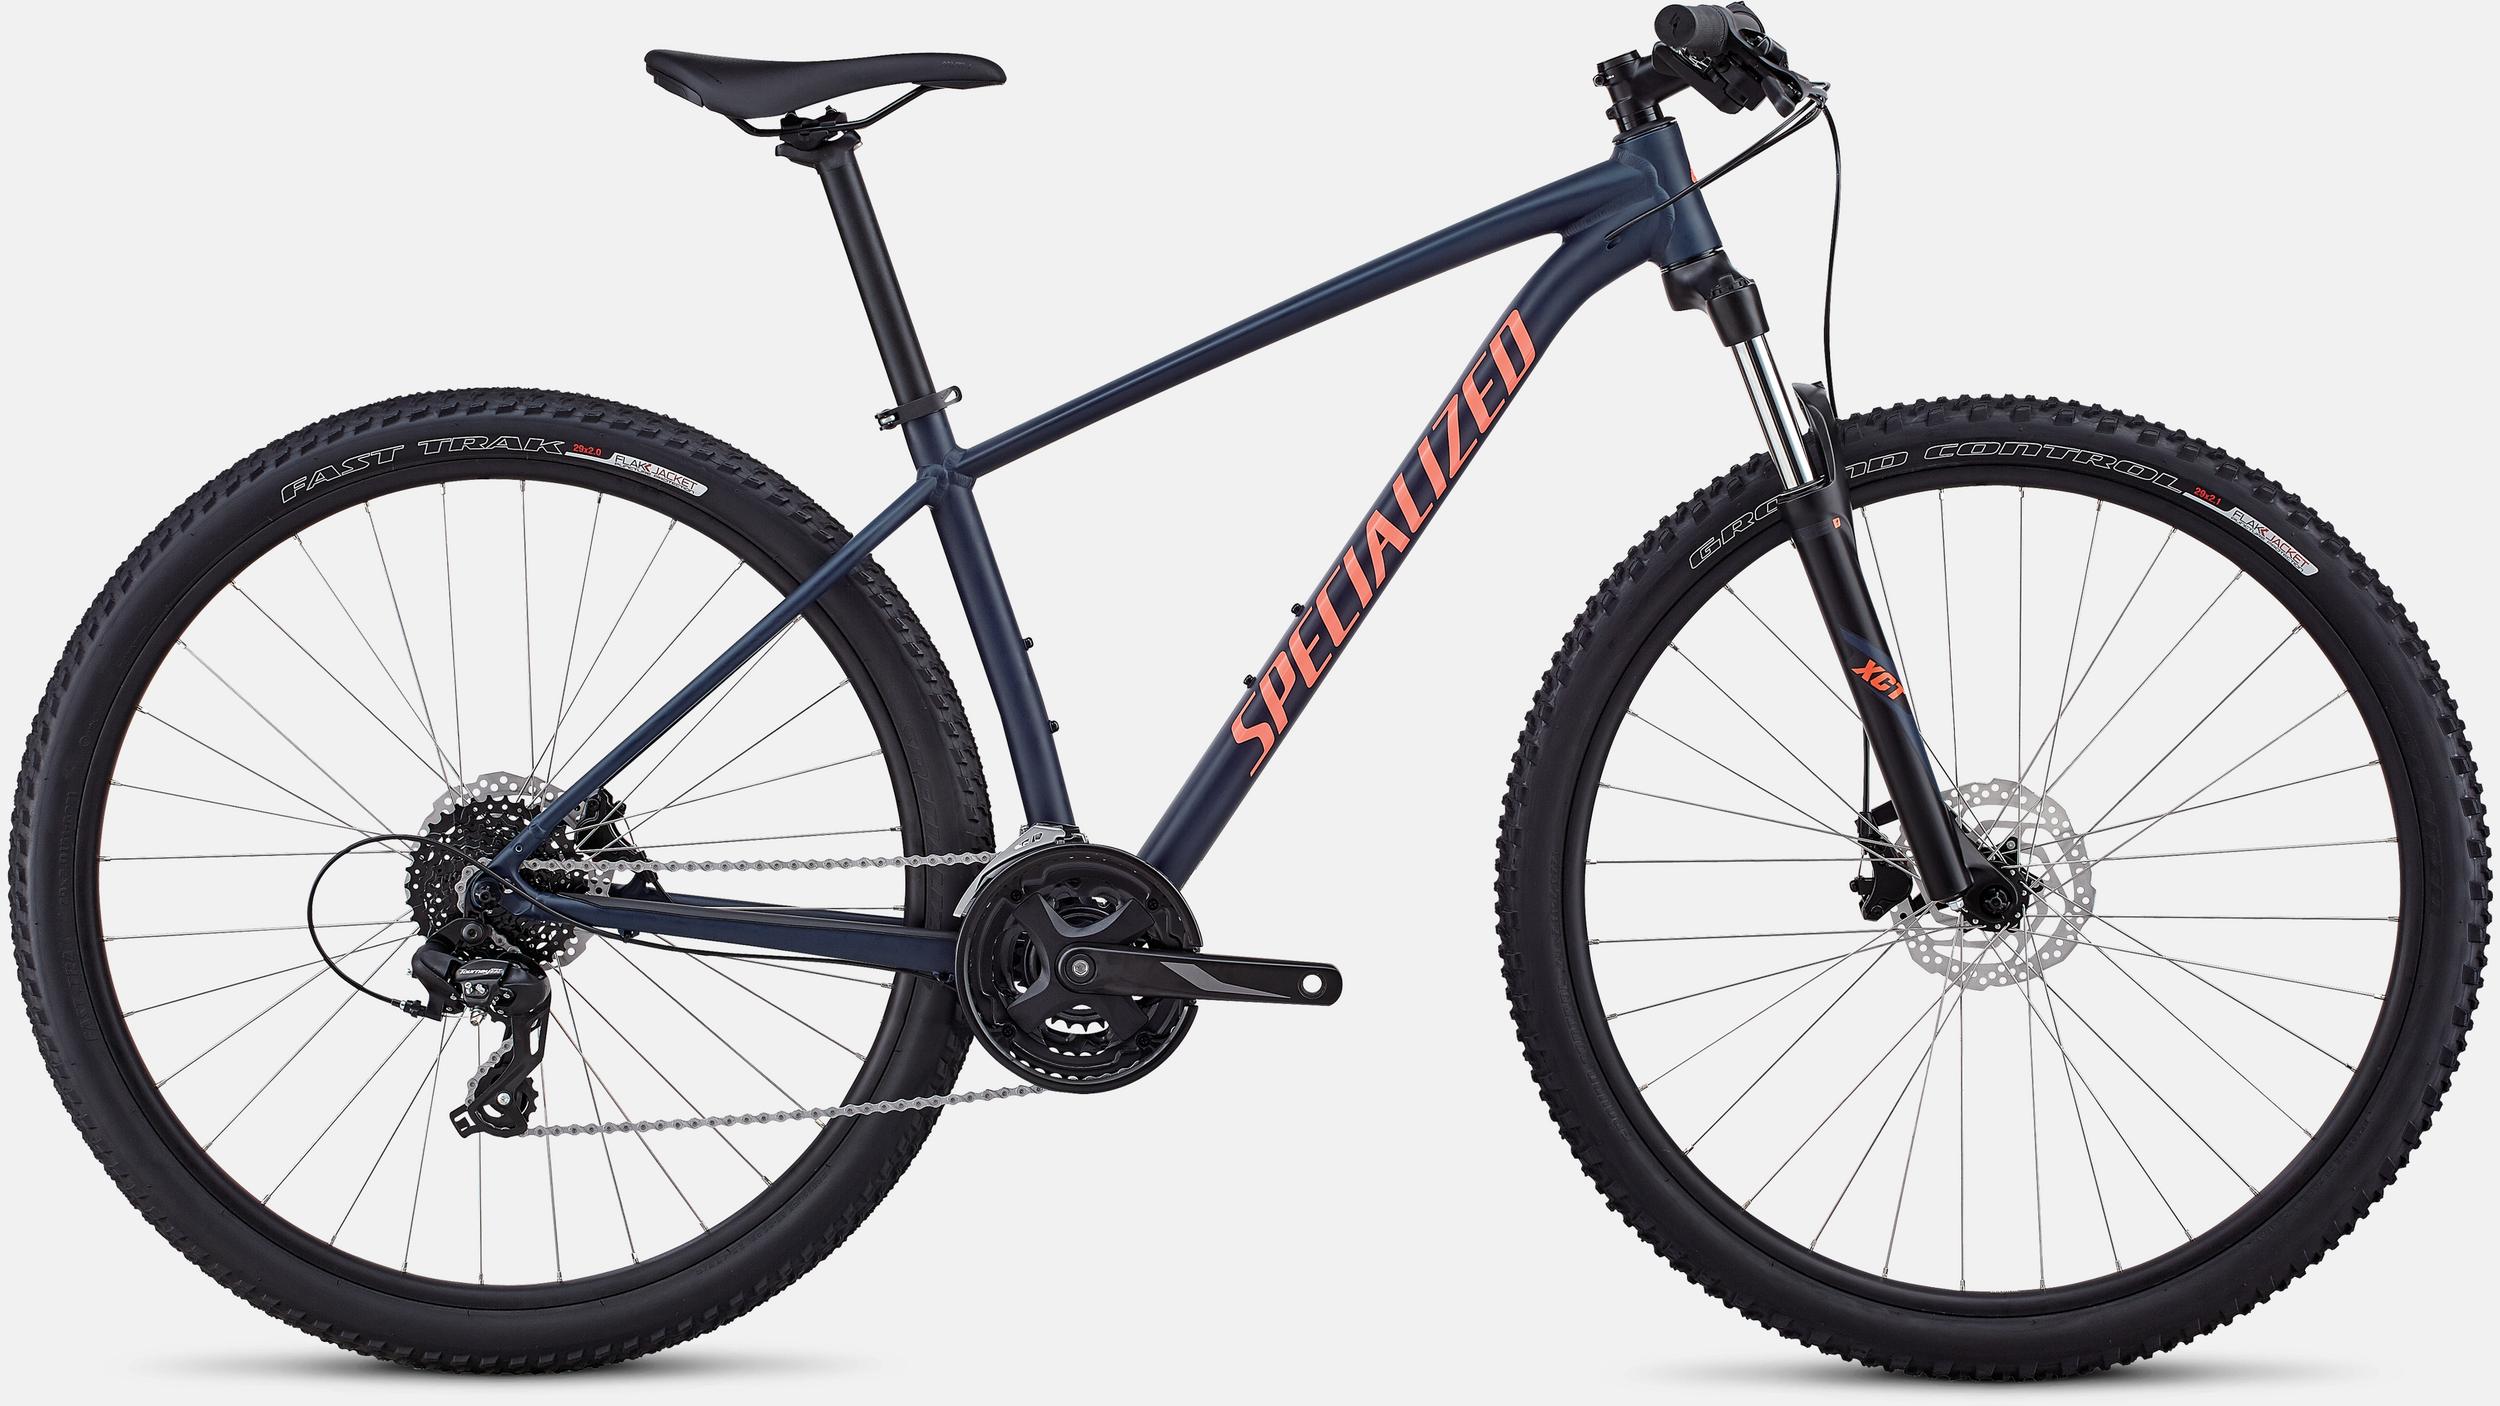 Dictate engineering Council Women's Rockhopper | Specialized.com